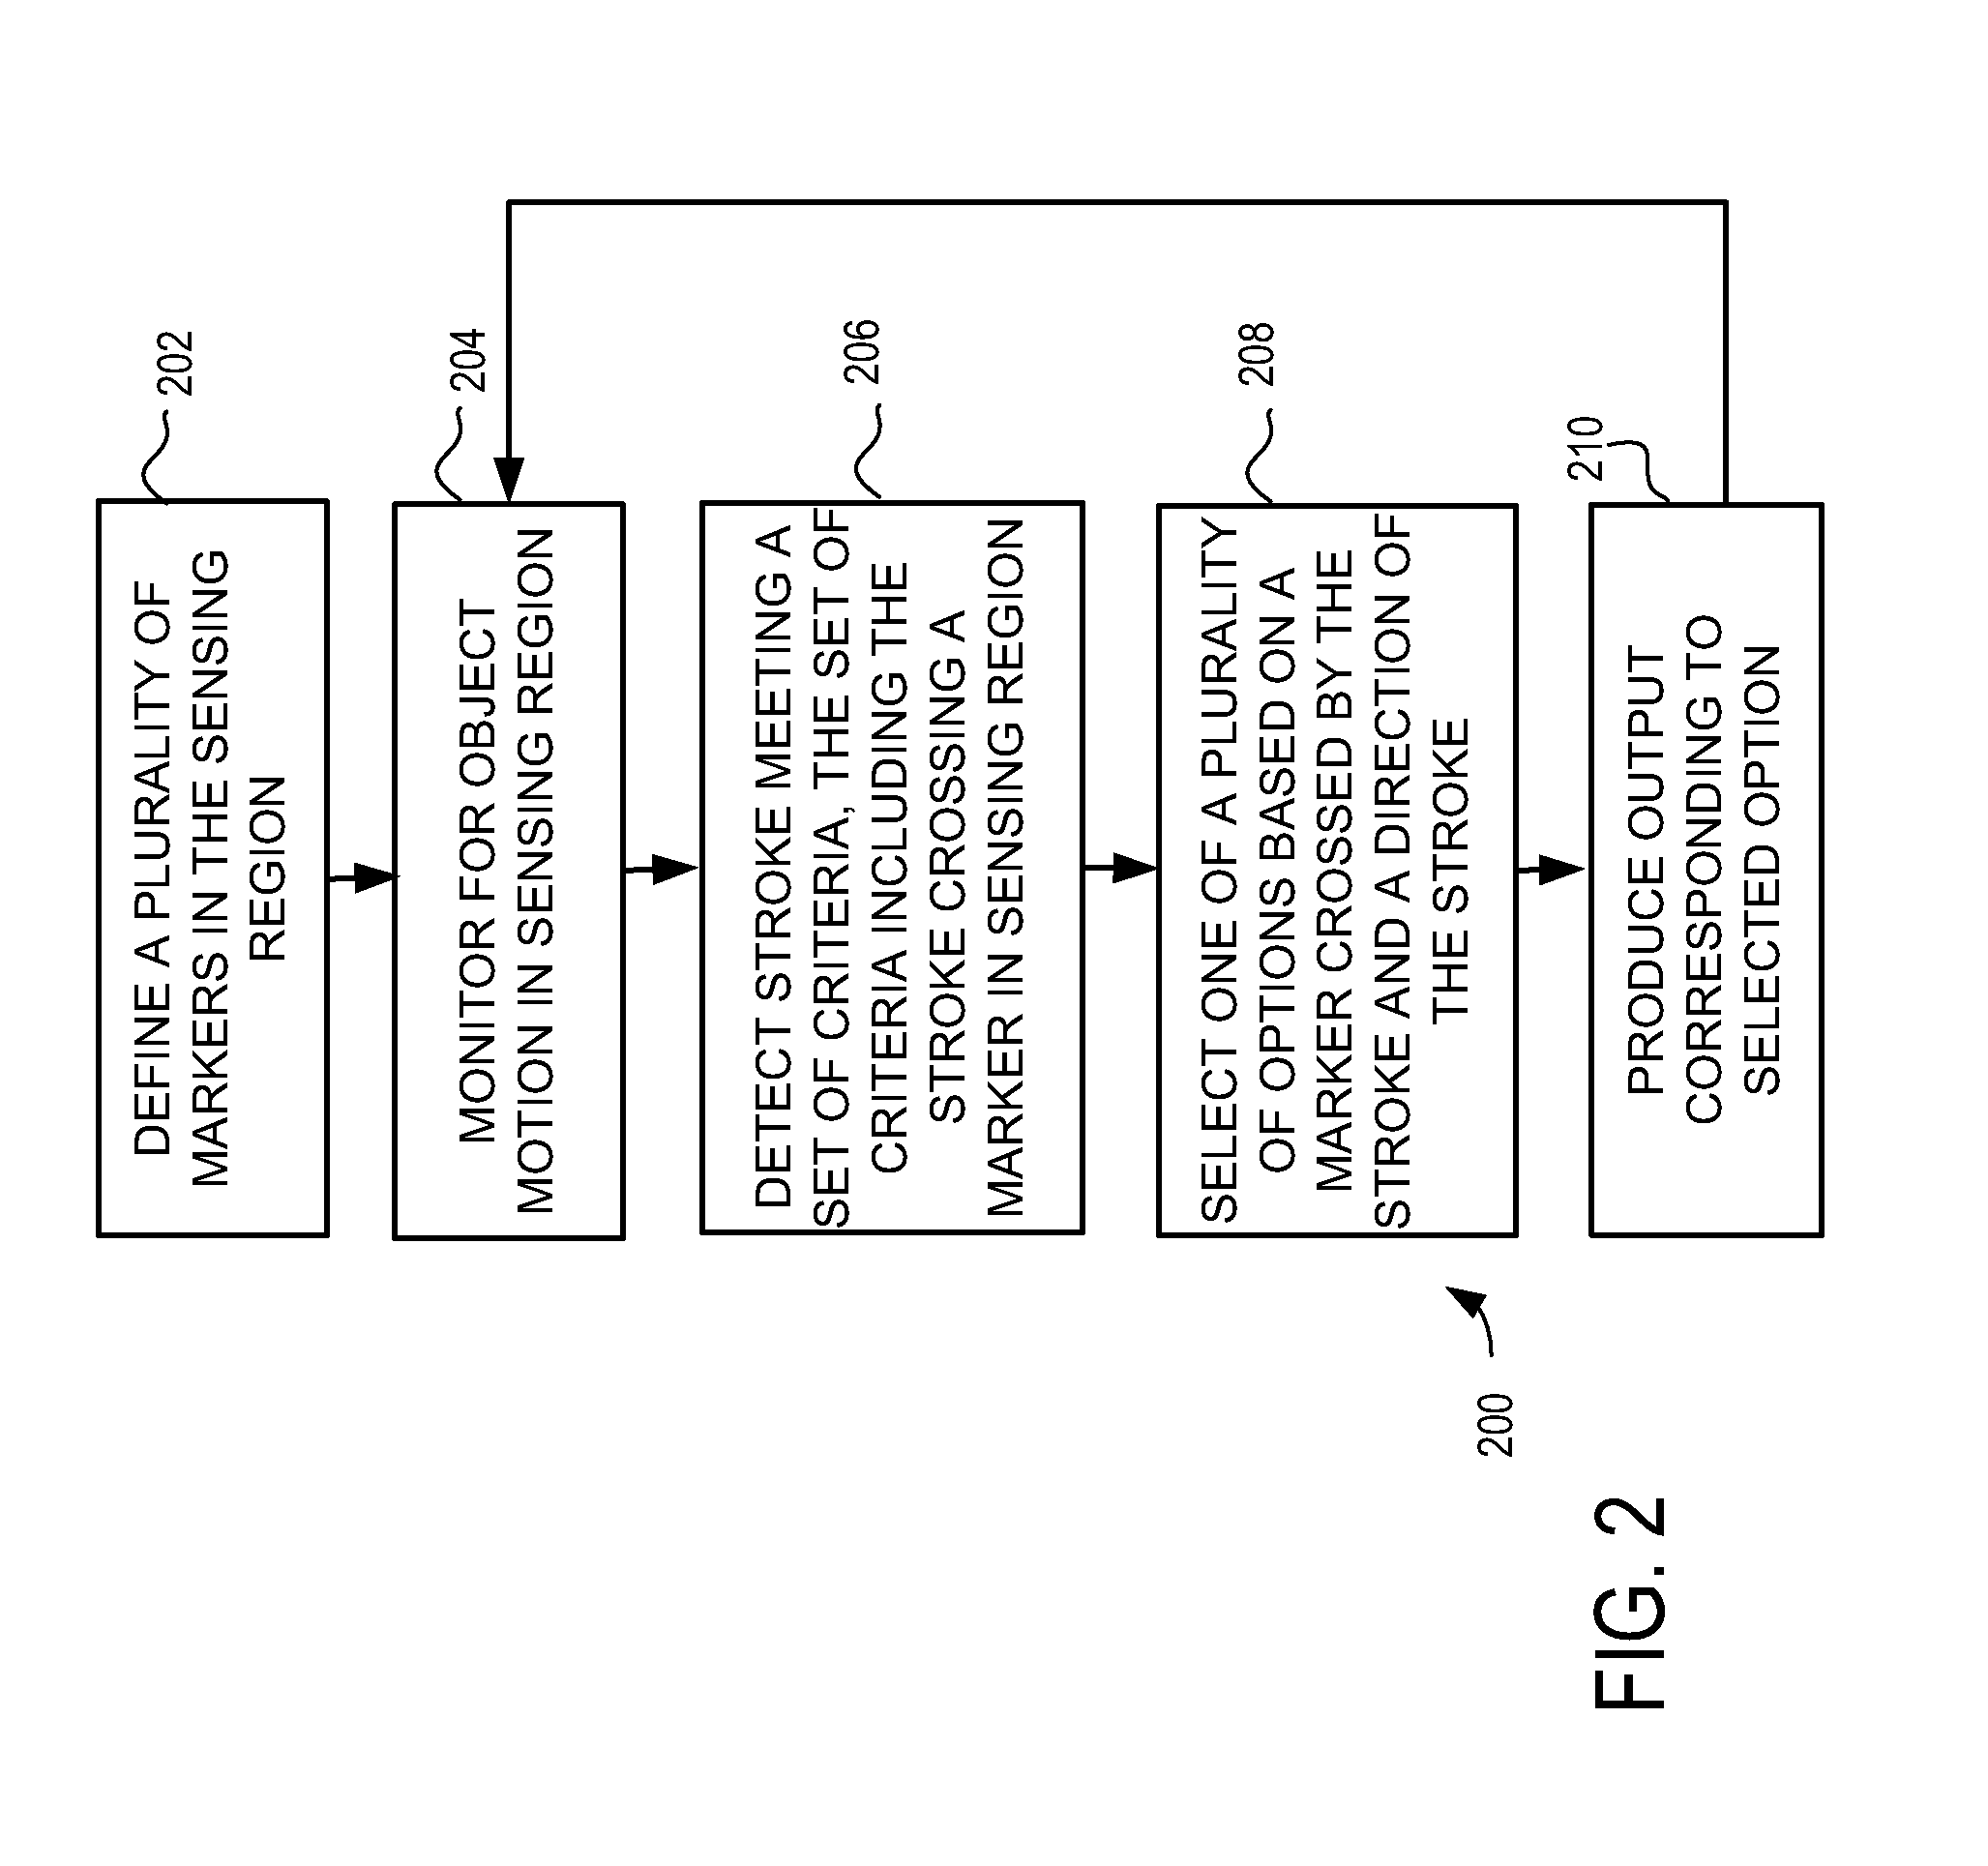 Proximity sensor device and method with swipethrough data entry